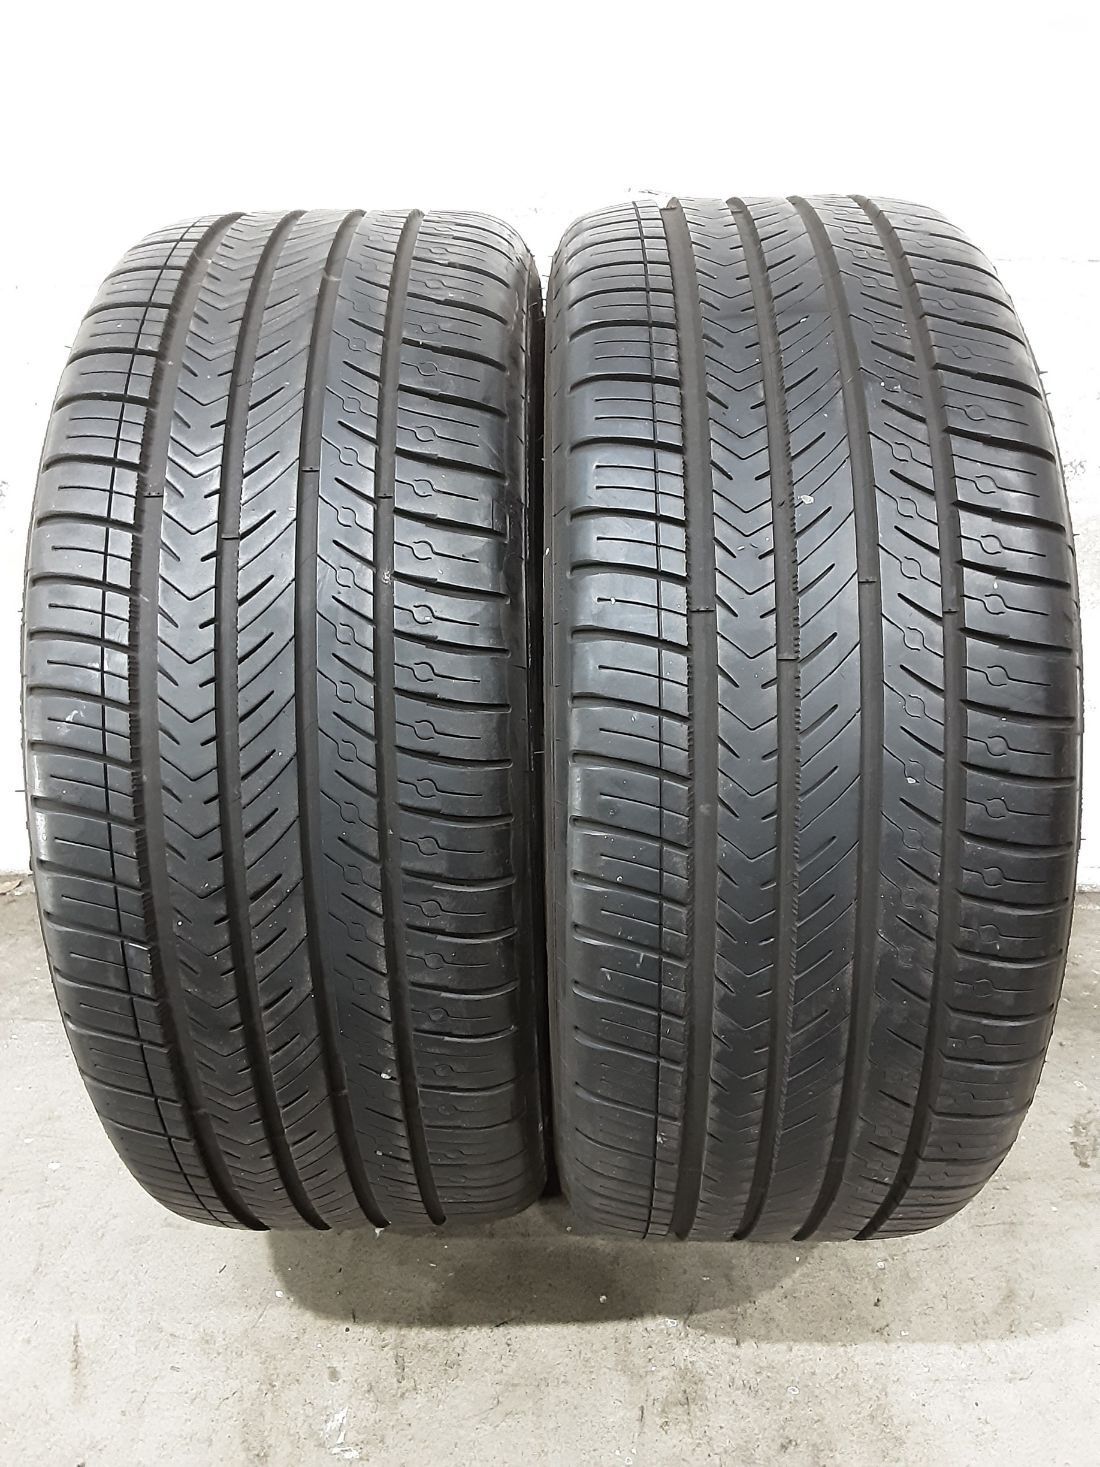 2x P245/45R18 Michelin Pilot Sport A/S 4 7/32 Used Tires